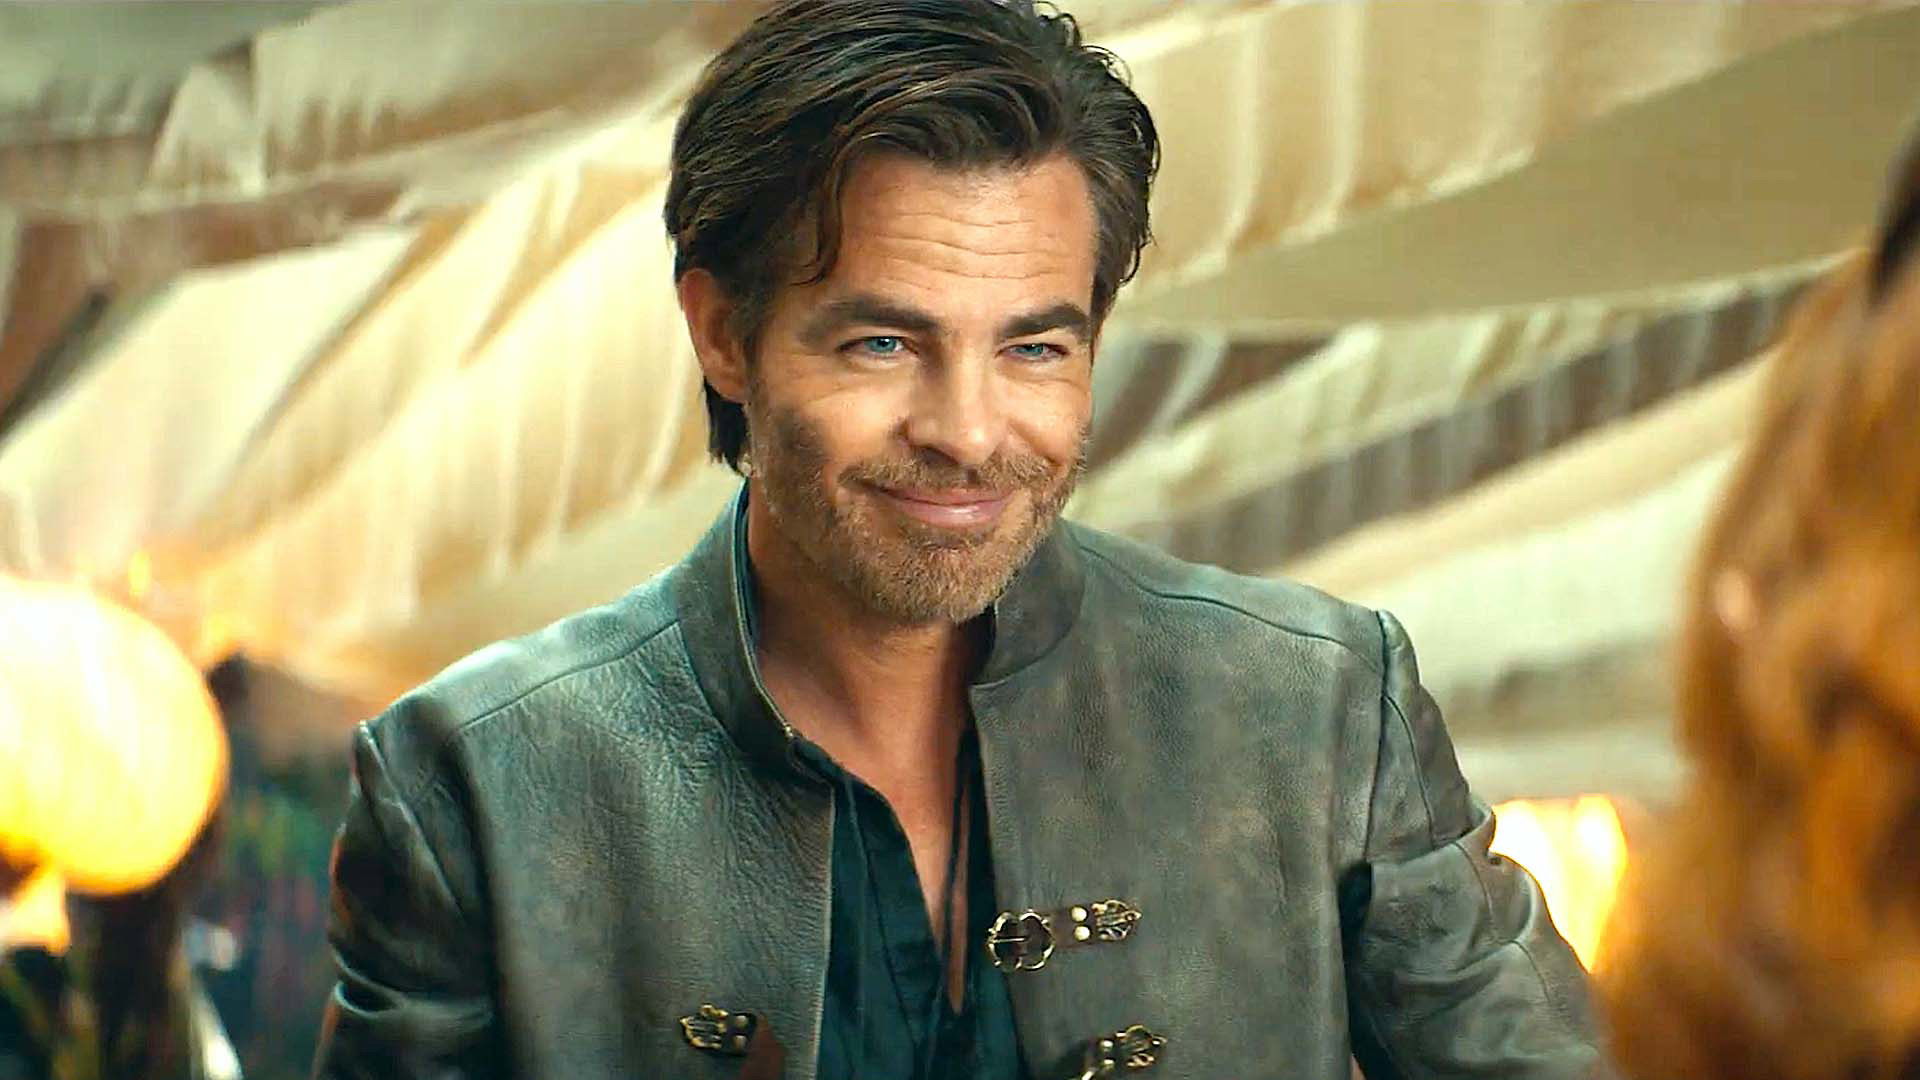 Chris-Pine-Dungeons-and-Dragons-Calabozos-y-dragones